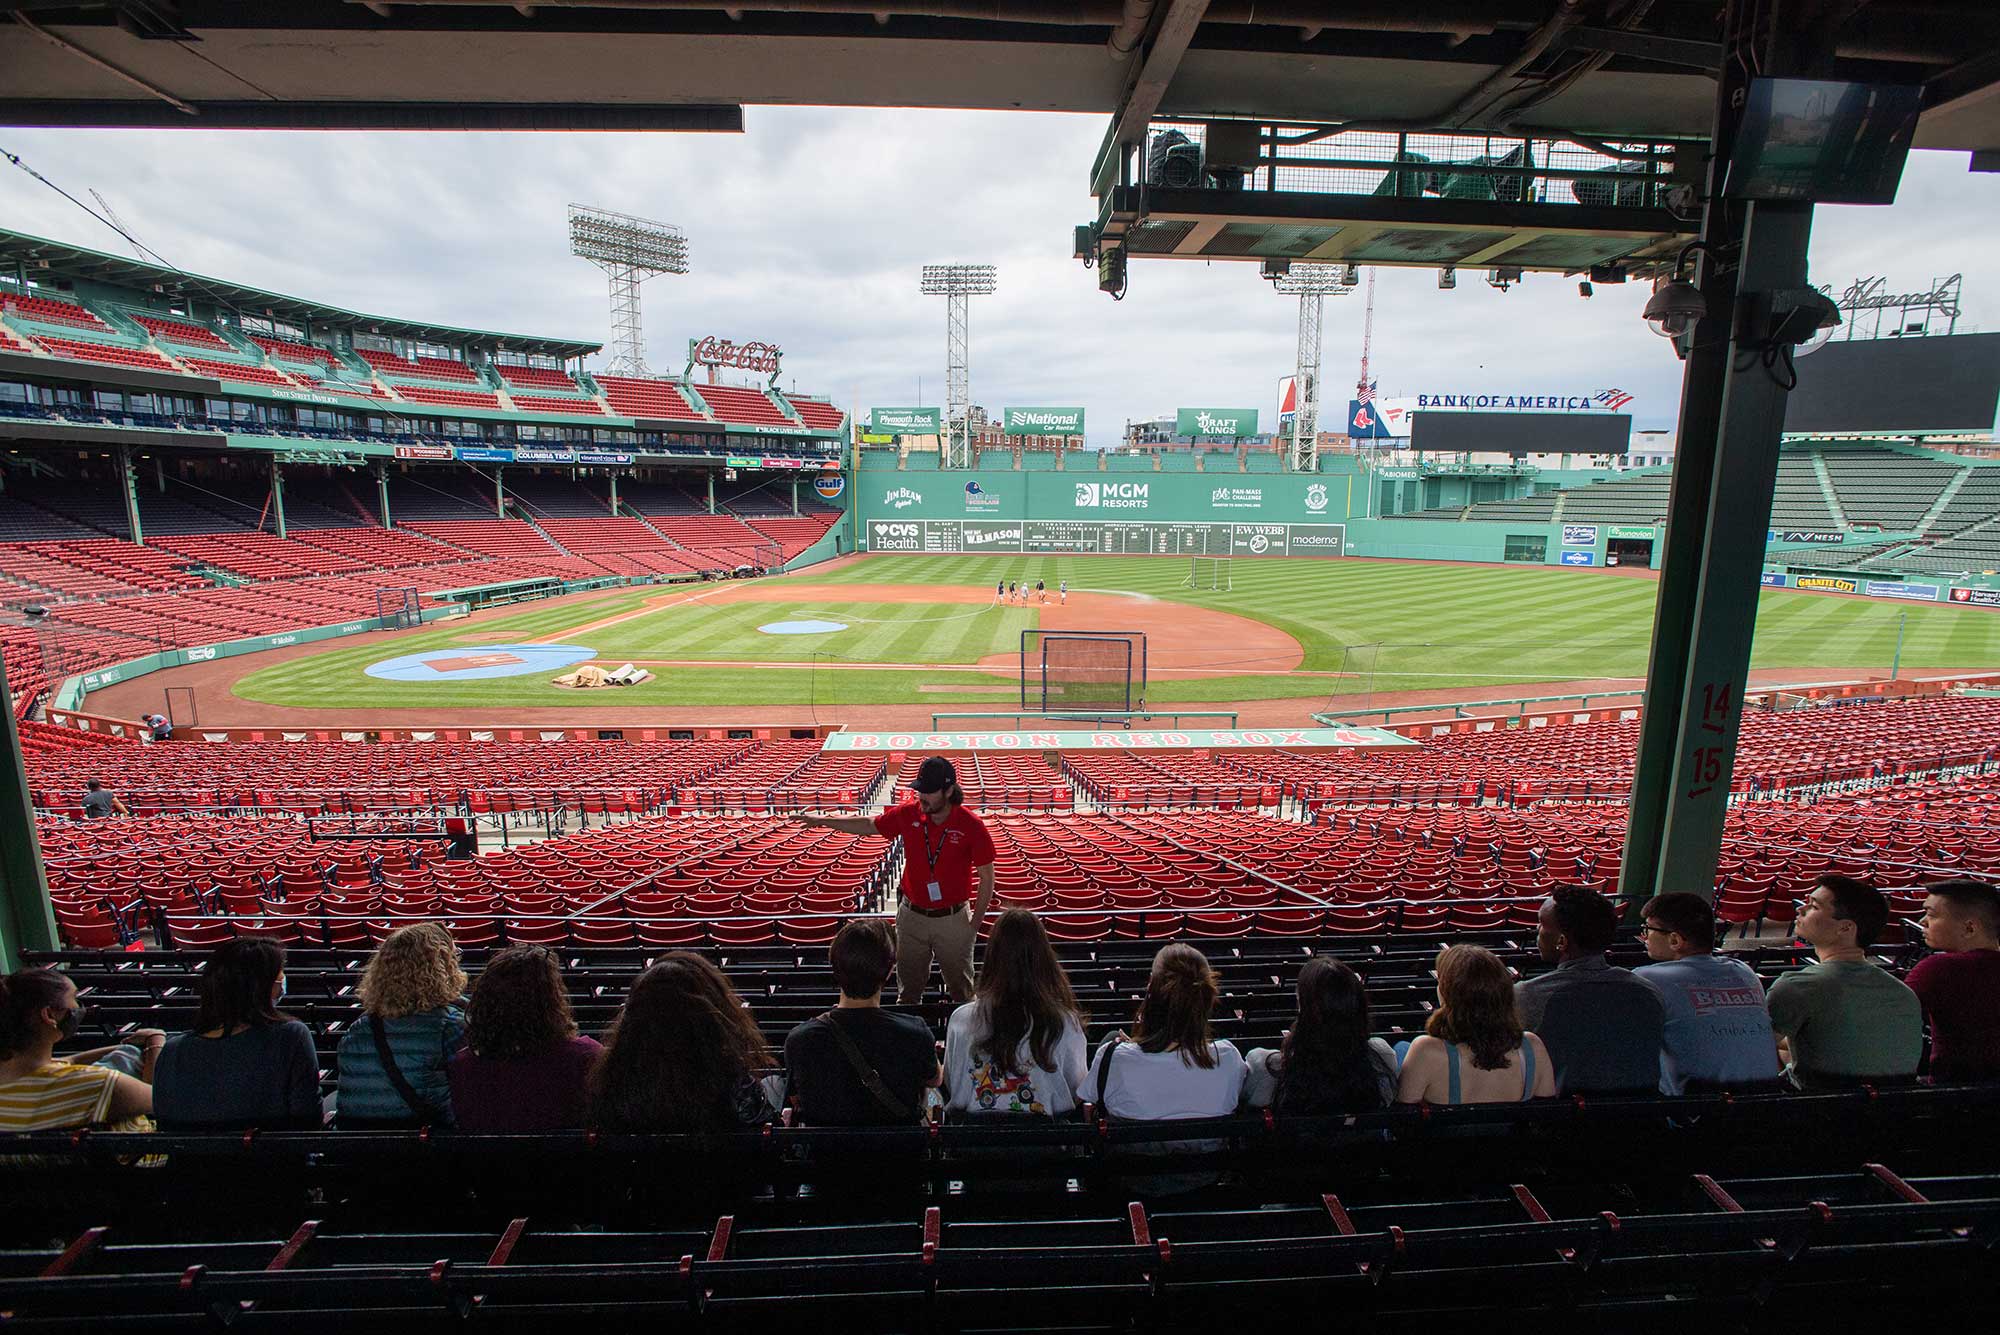 Students sitting in a row of seats at Fenway along the first base line under the overhang as a tour guide dressed in red tells them about the park.